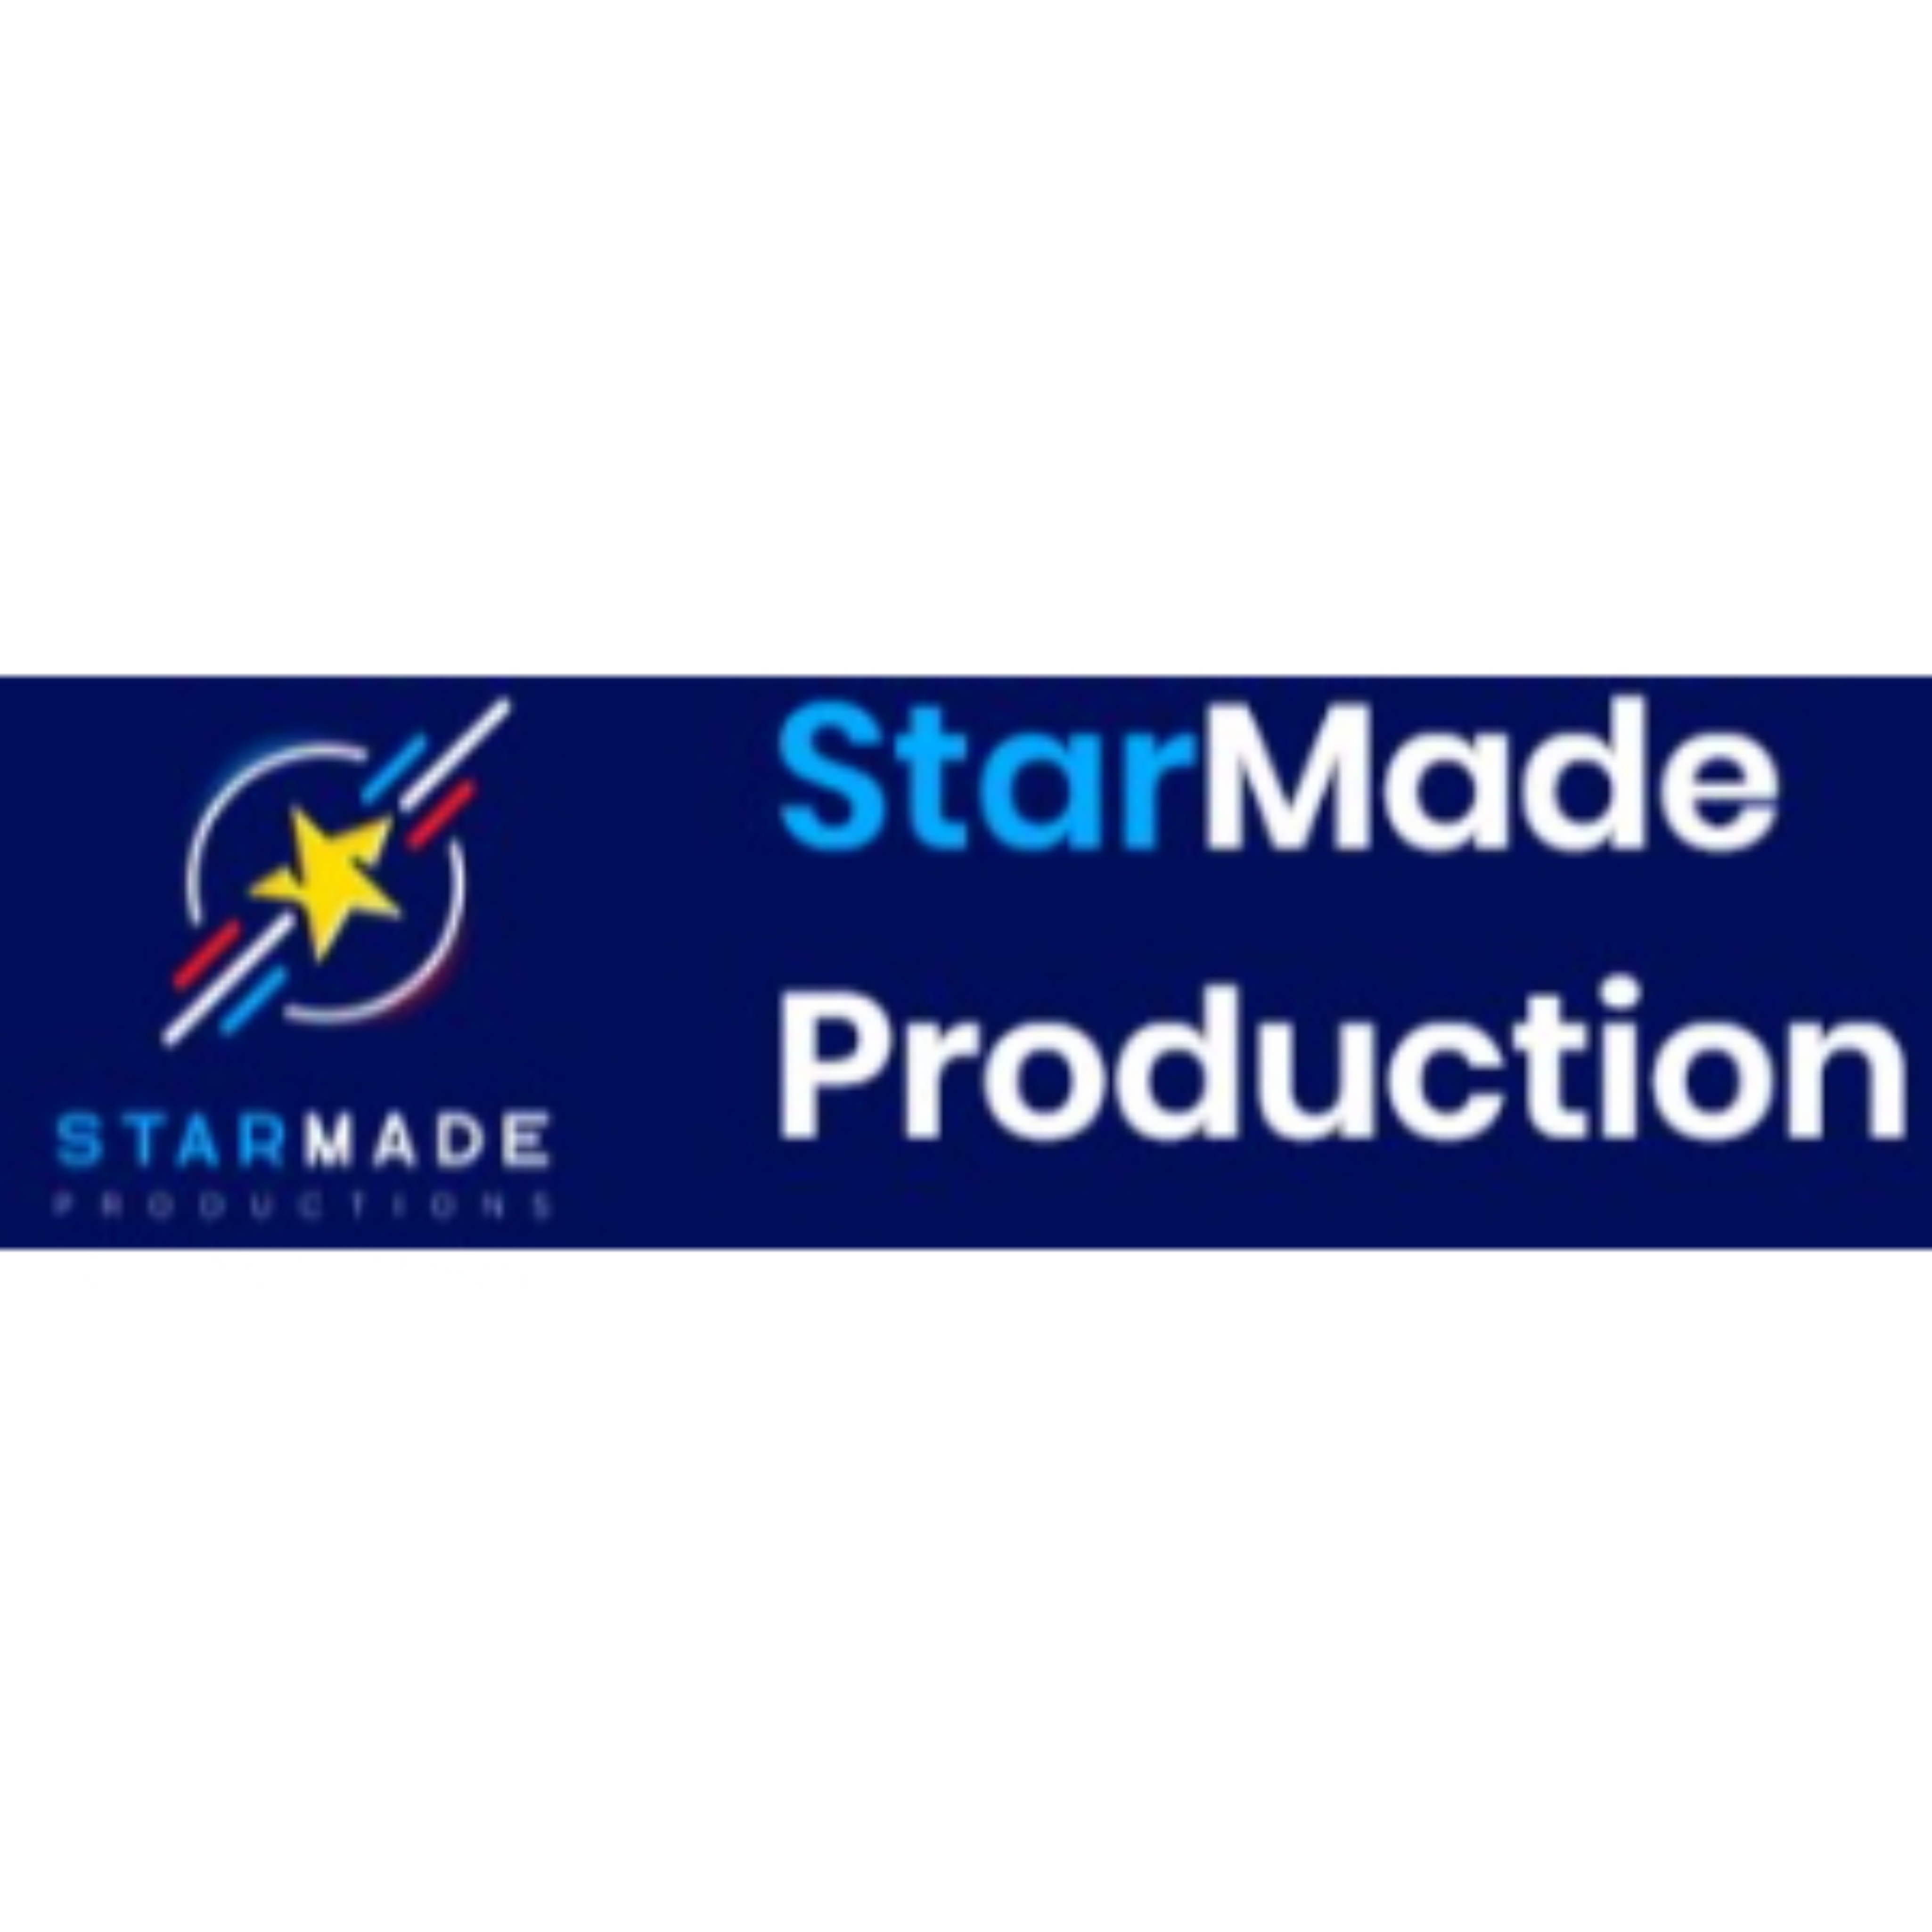 Starmade Production